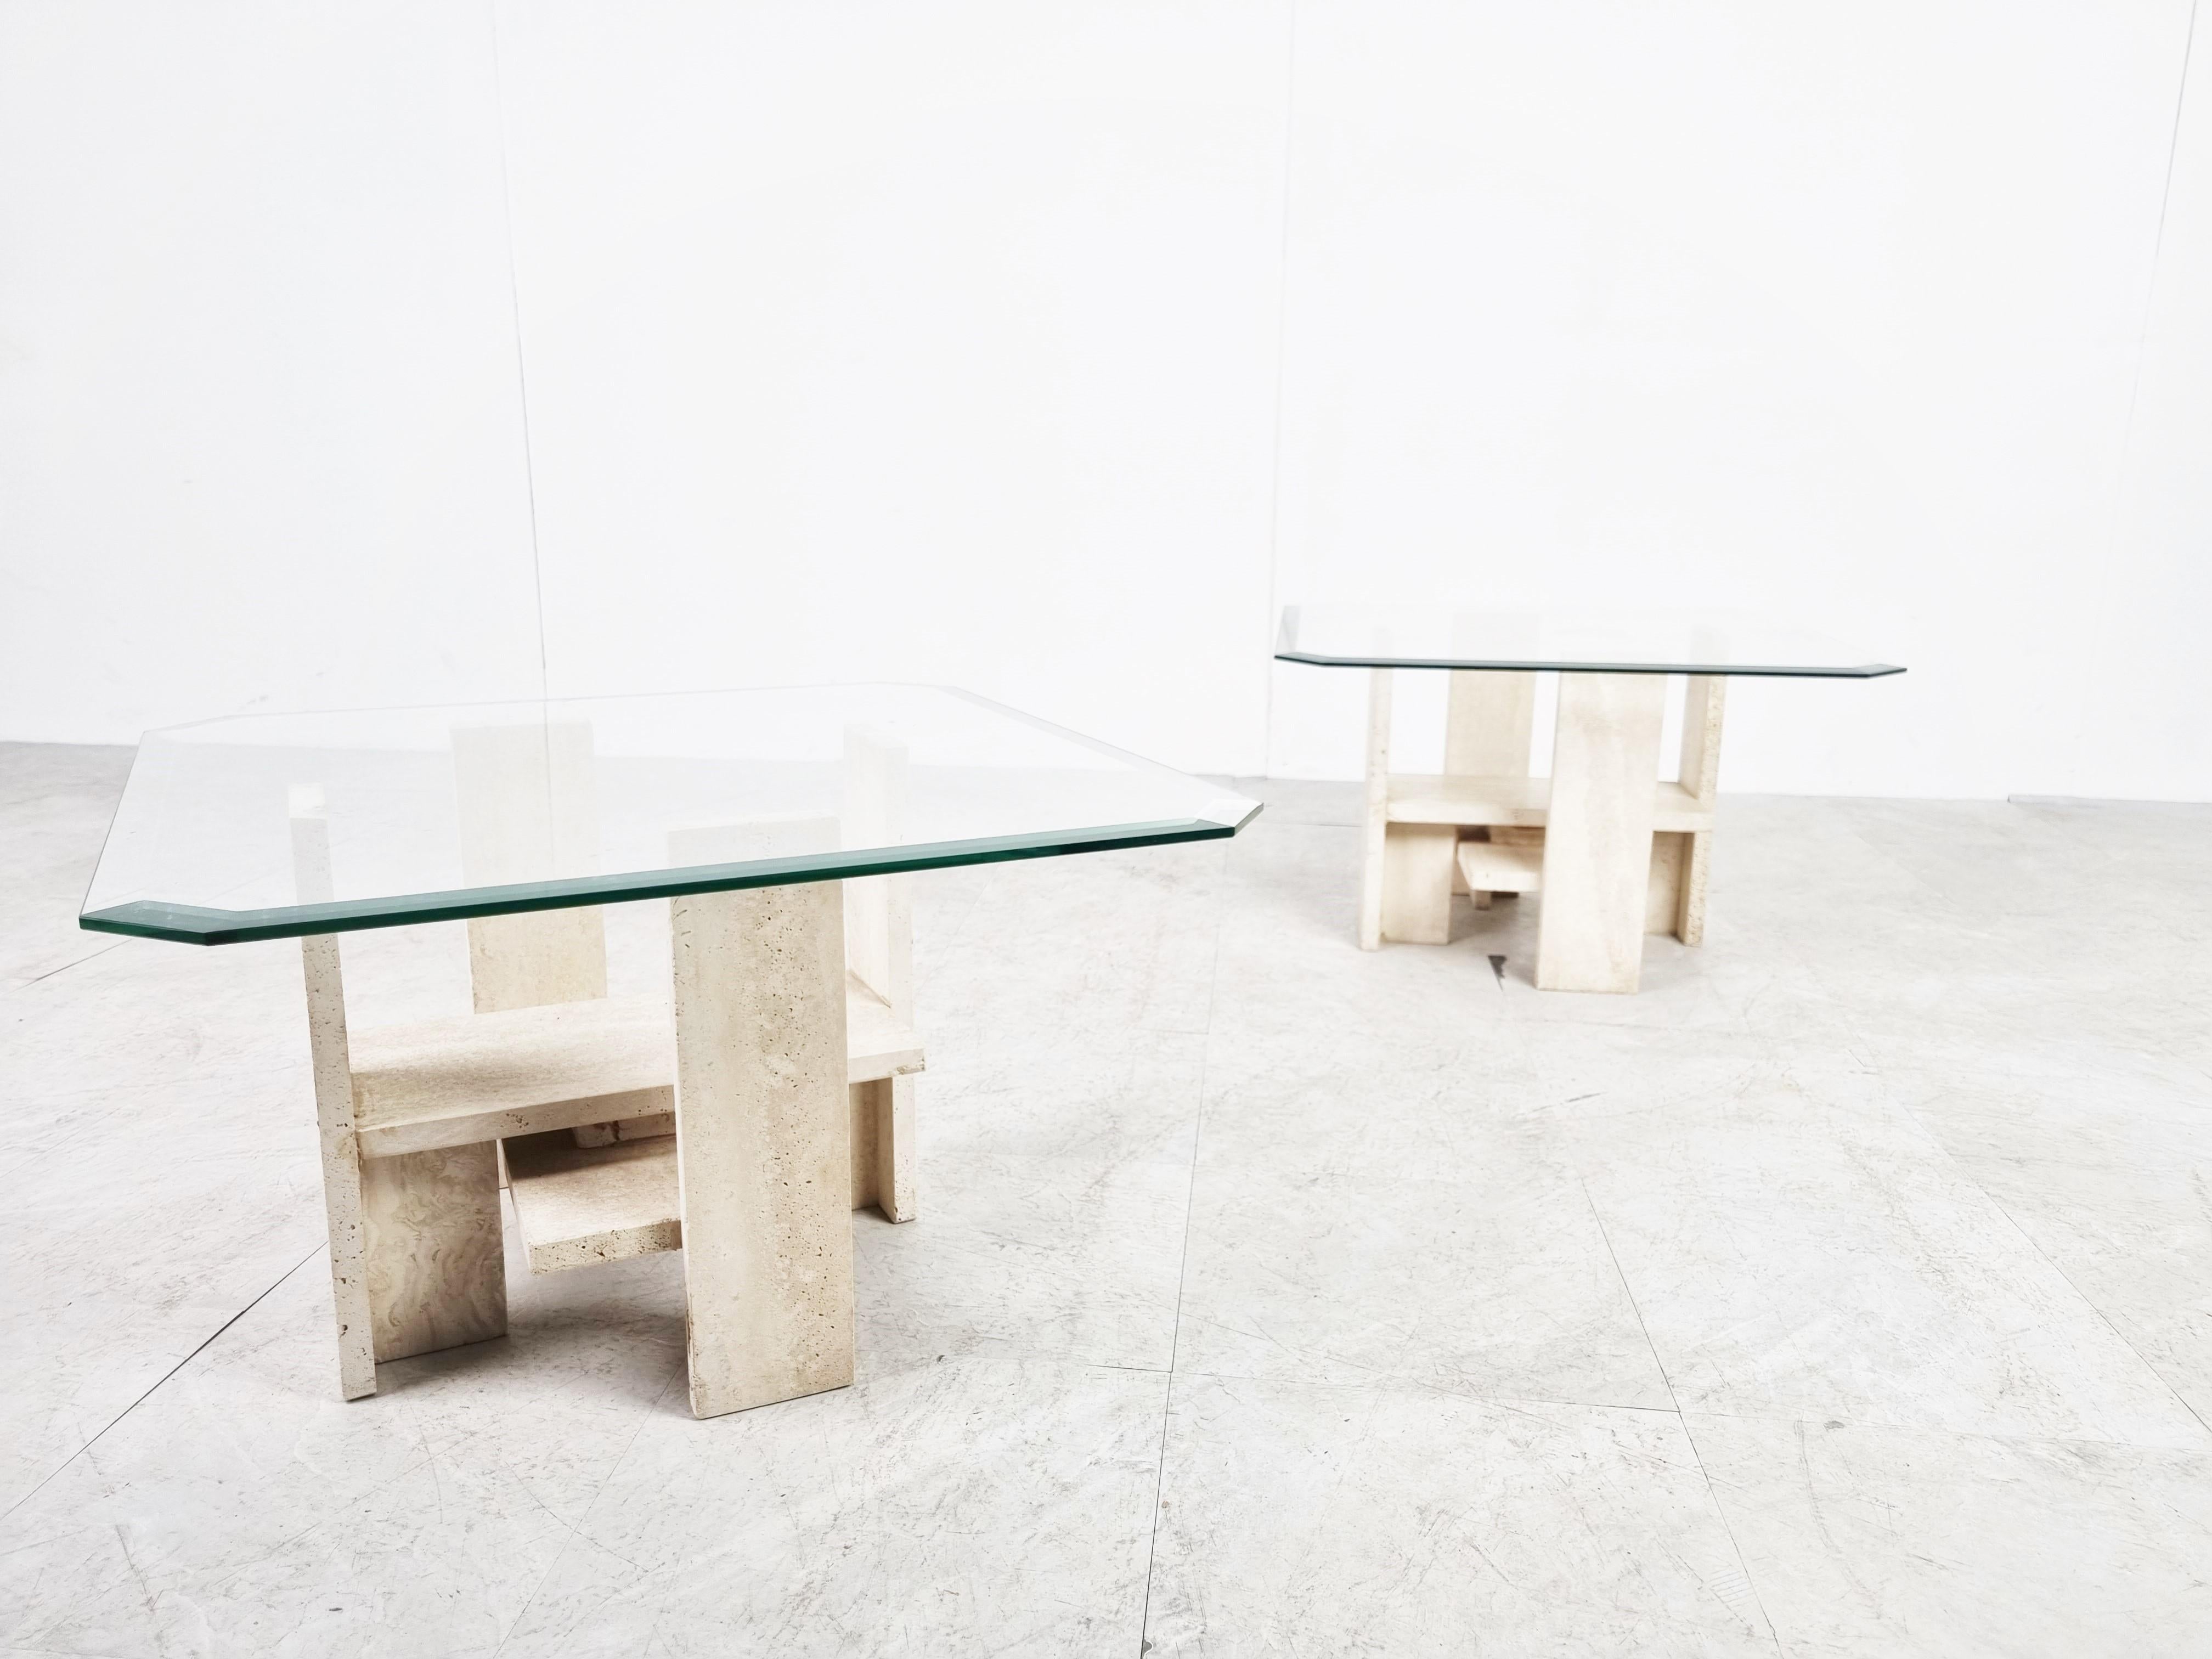 Pair of architectural coffee tables or side tables made from a solid travertine base and with a beveled glass top.

The tables where designed by Willy Ballez.

The modern look/design mixes well with nowadays interiors, especially with the light